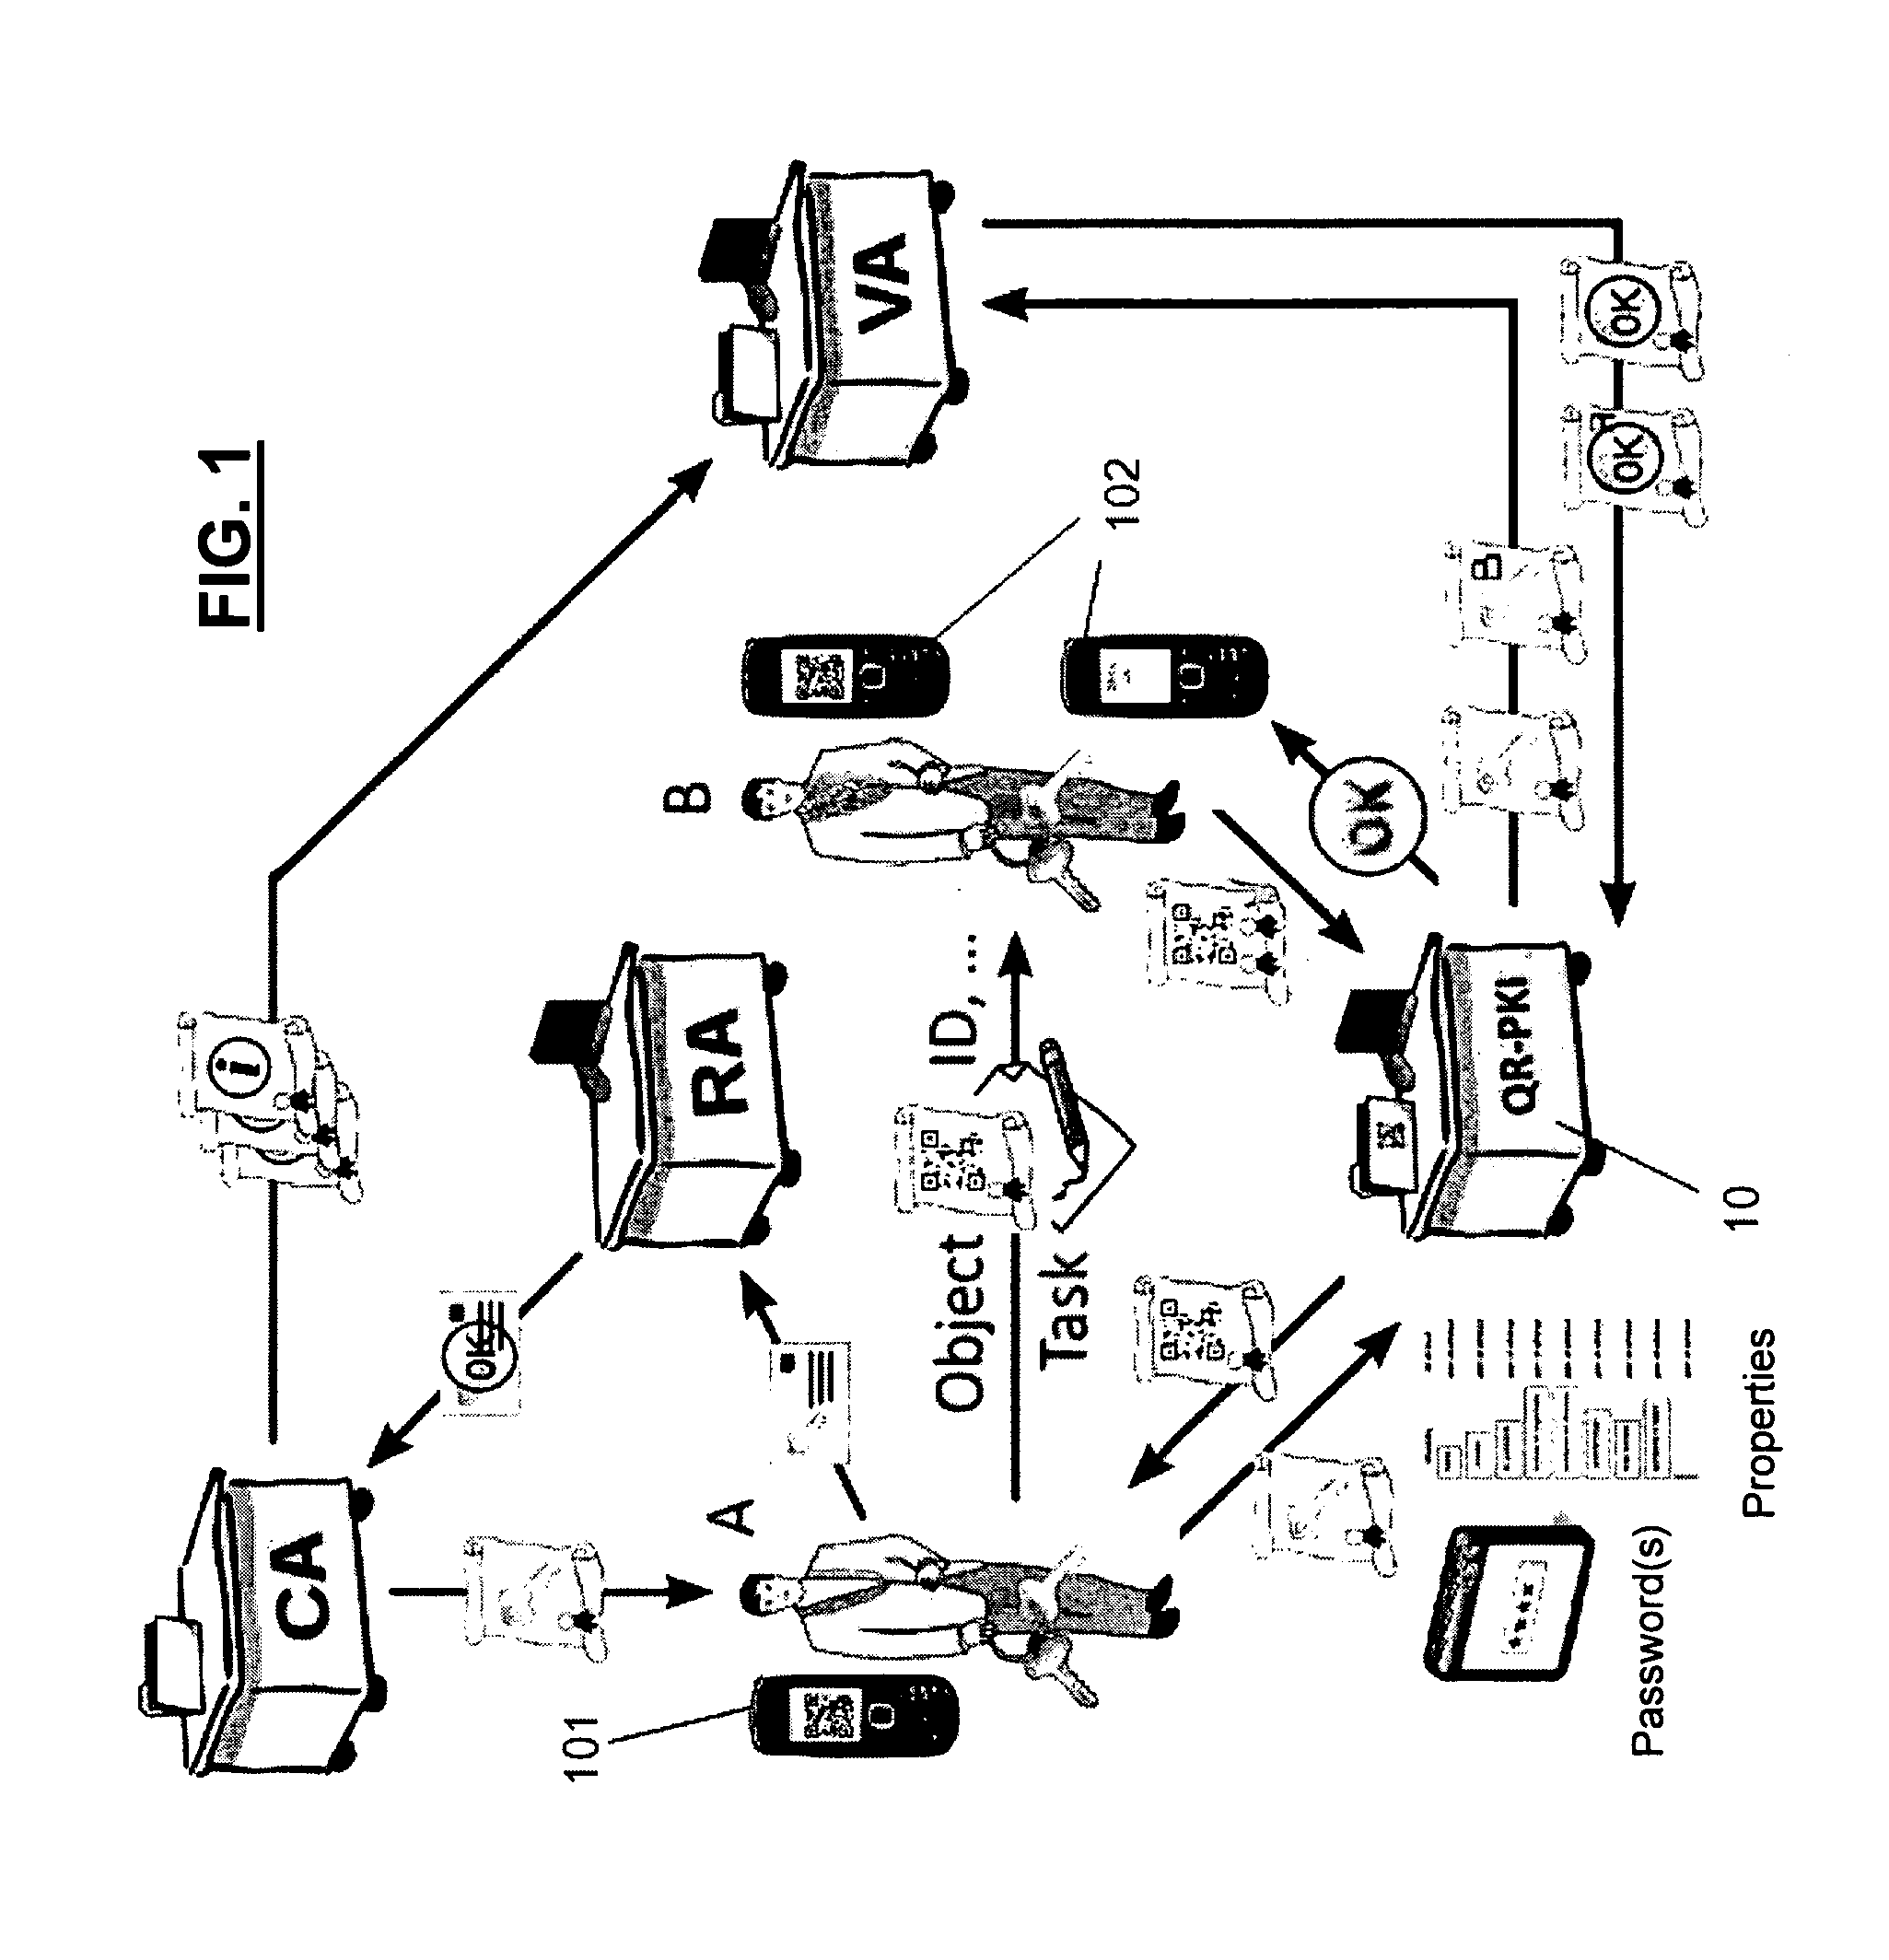 Method and system for authenticating entities by means of terminals